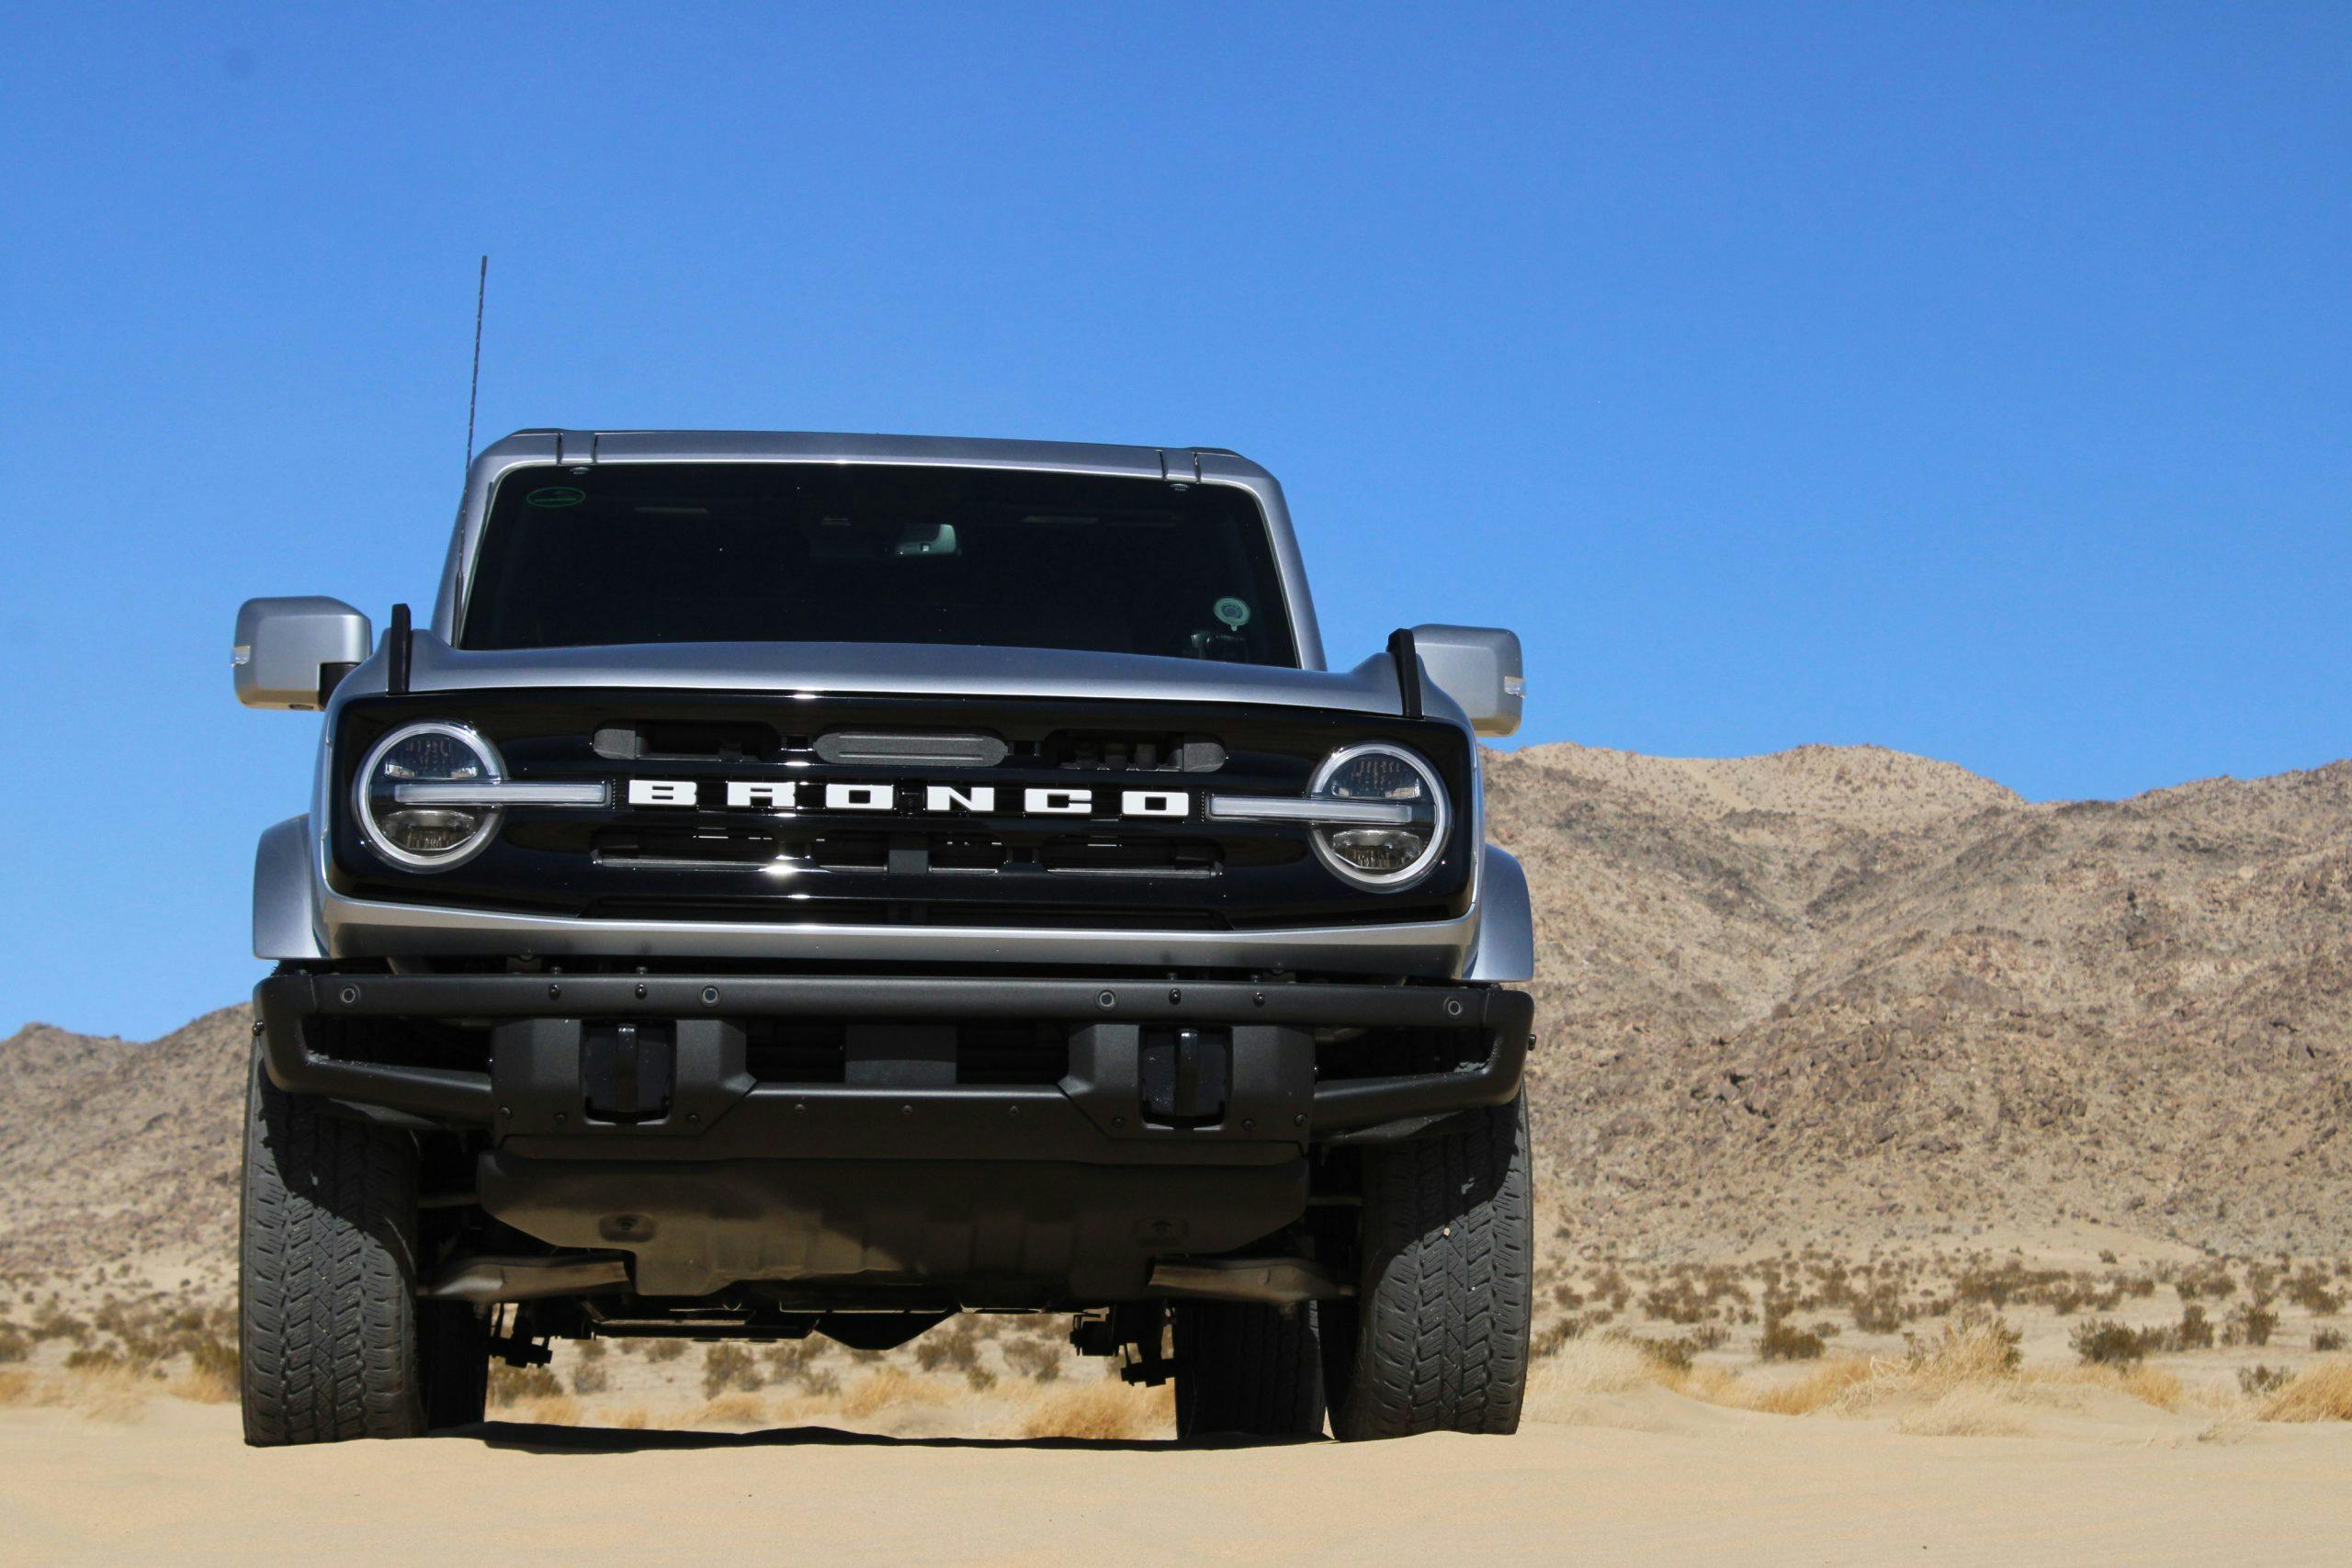 Ford Bronco King of Hammers front